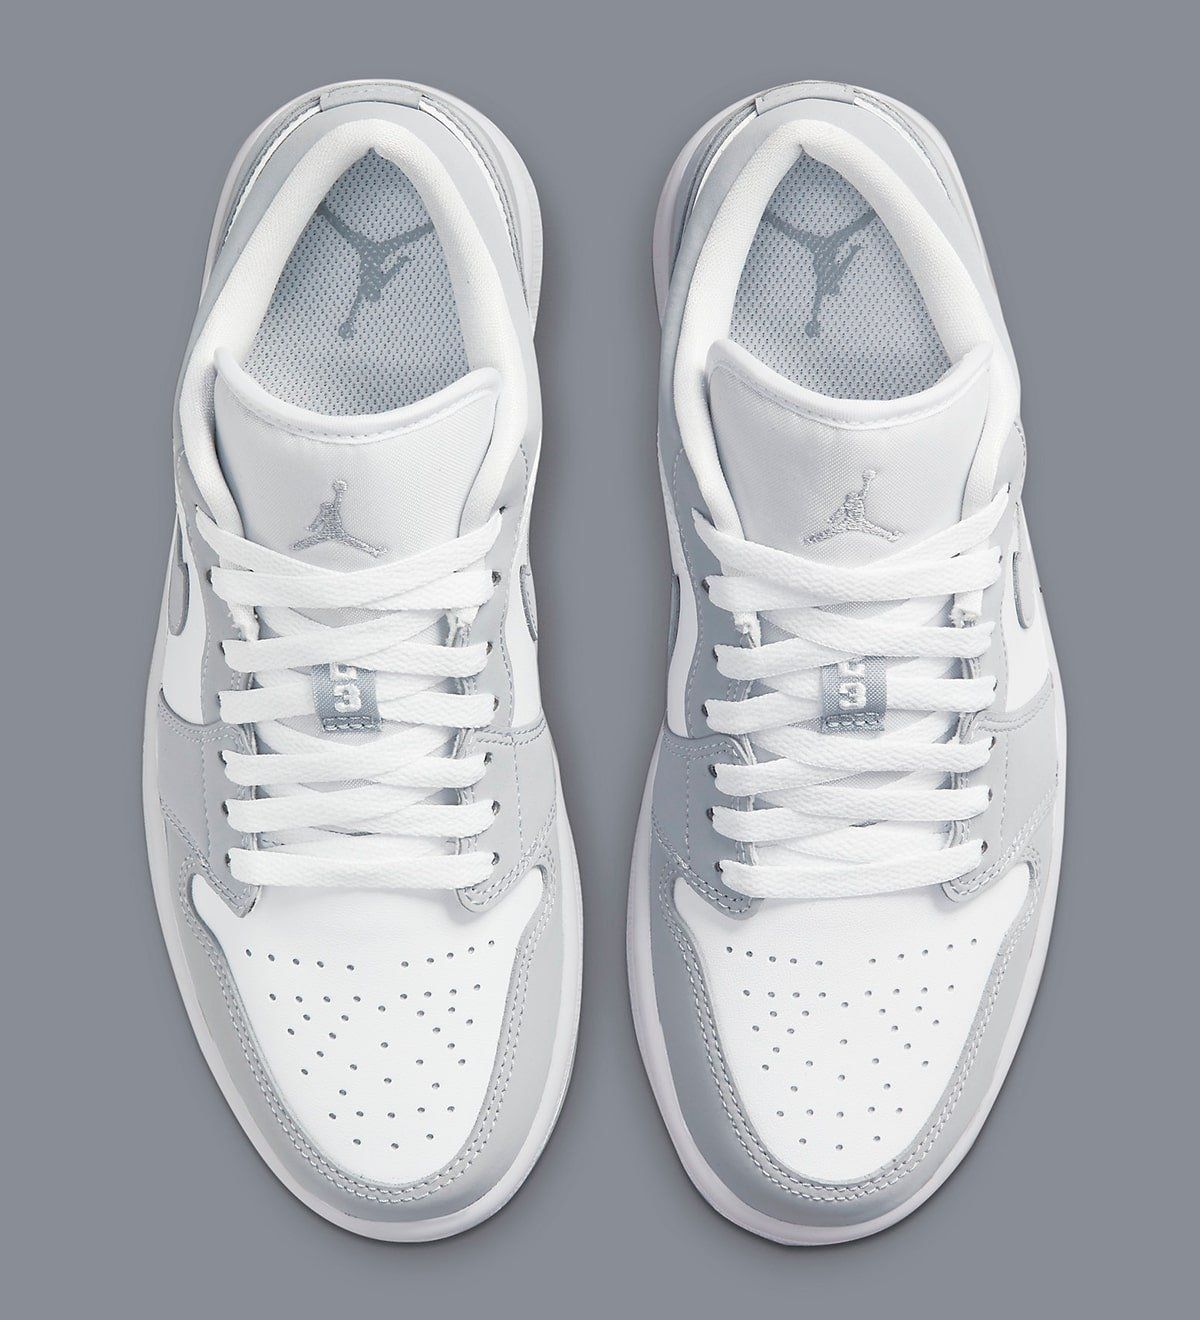 grey and white low top jordans